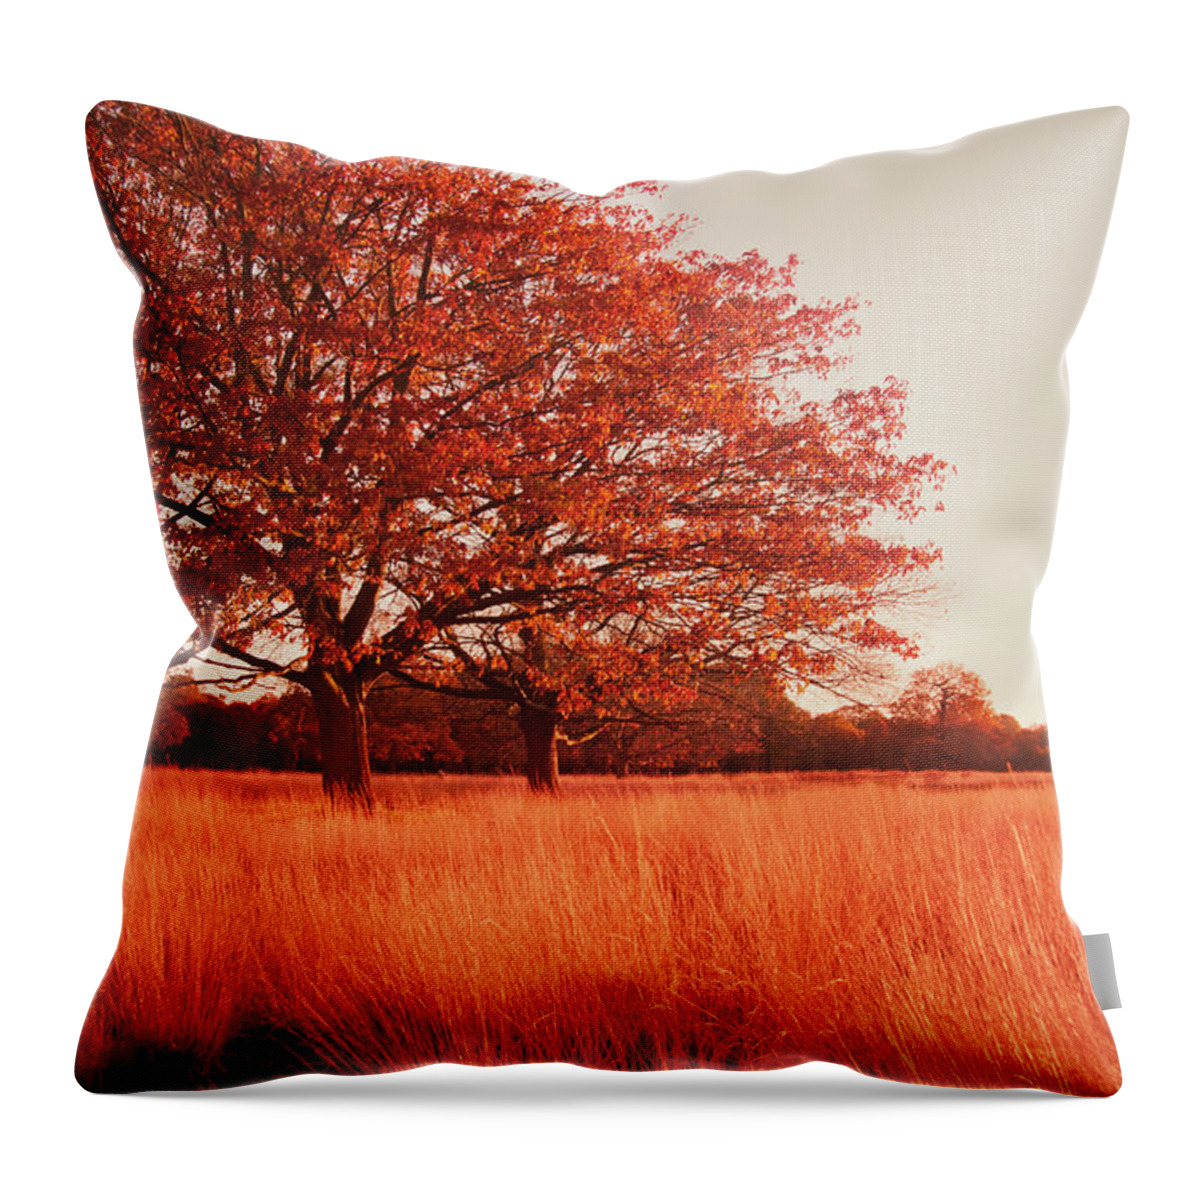 Autumn Throw Pillow featuring the photograph Red Autumn by Violet Gray